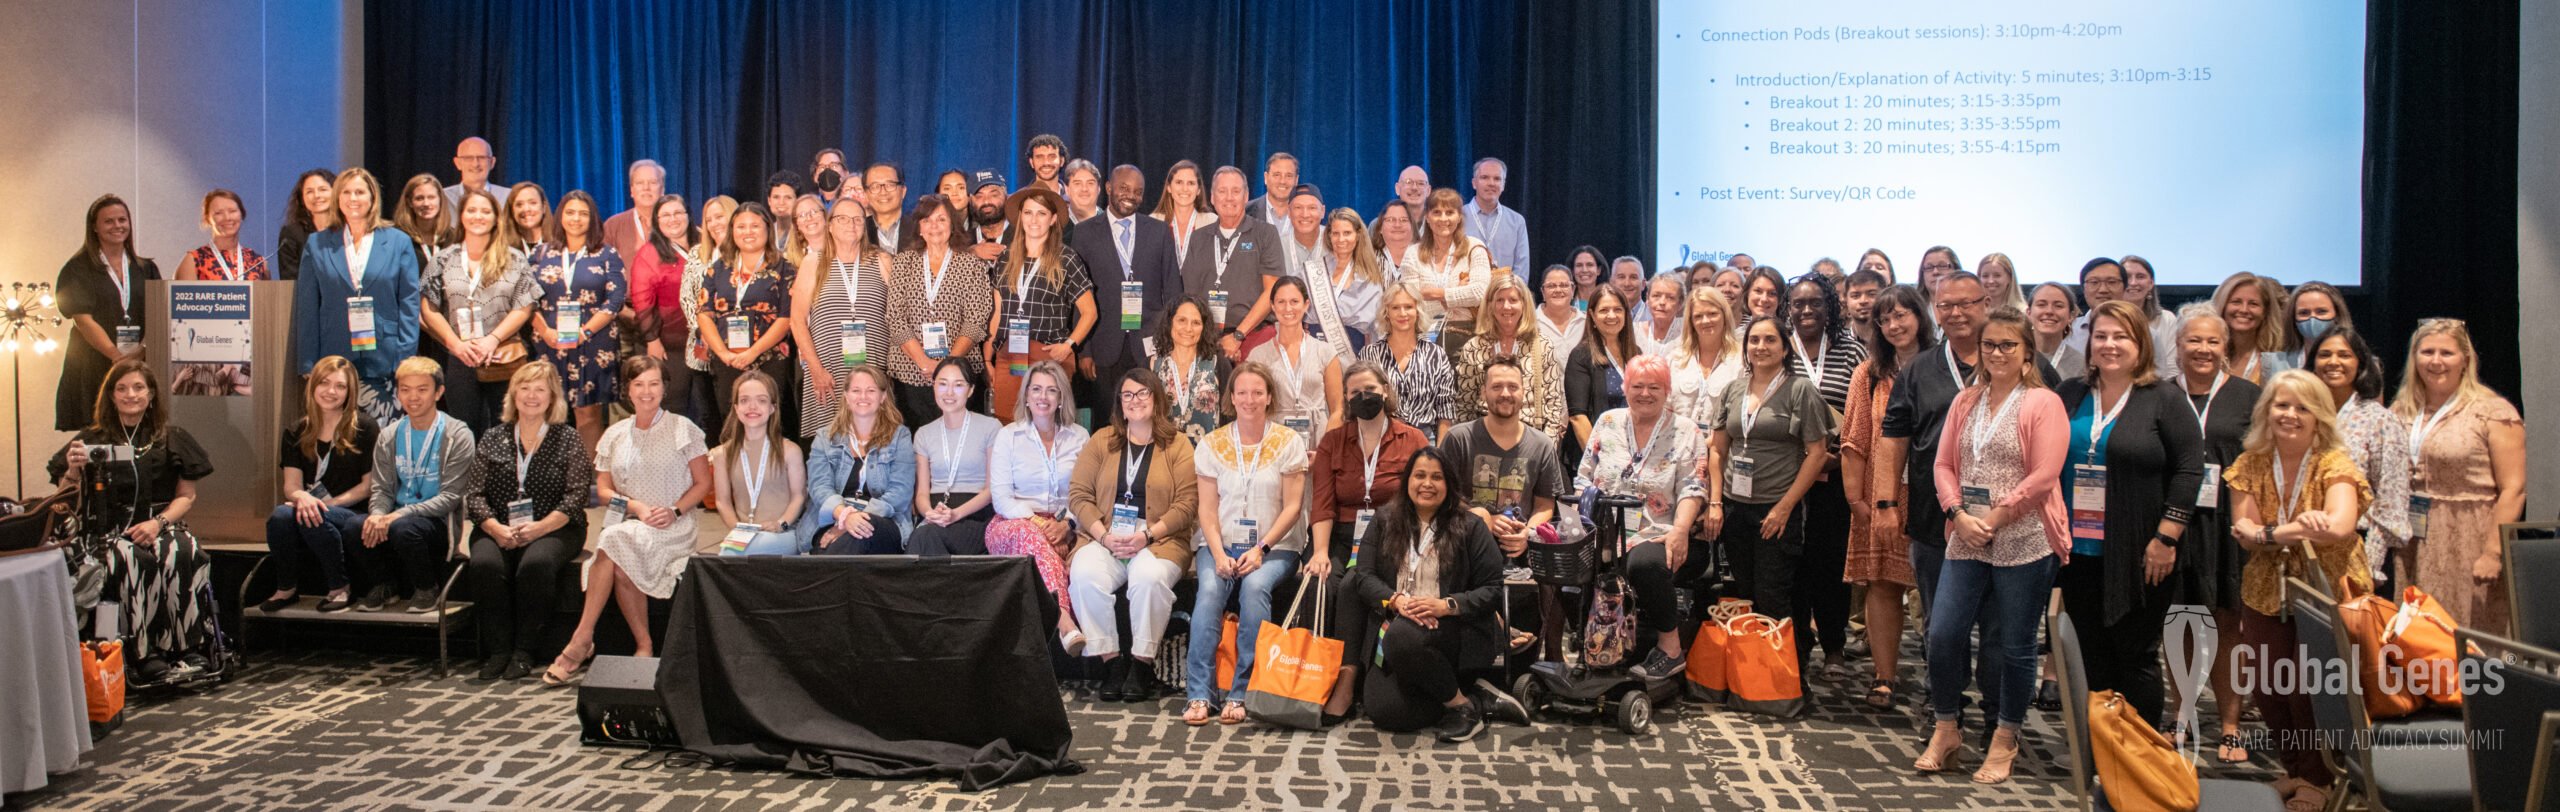 Global Advocacy Alliance members meet during the Patient Advocacy Summit in San Diego, California